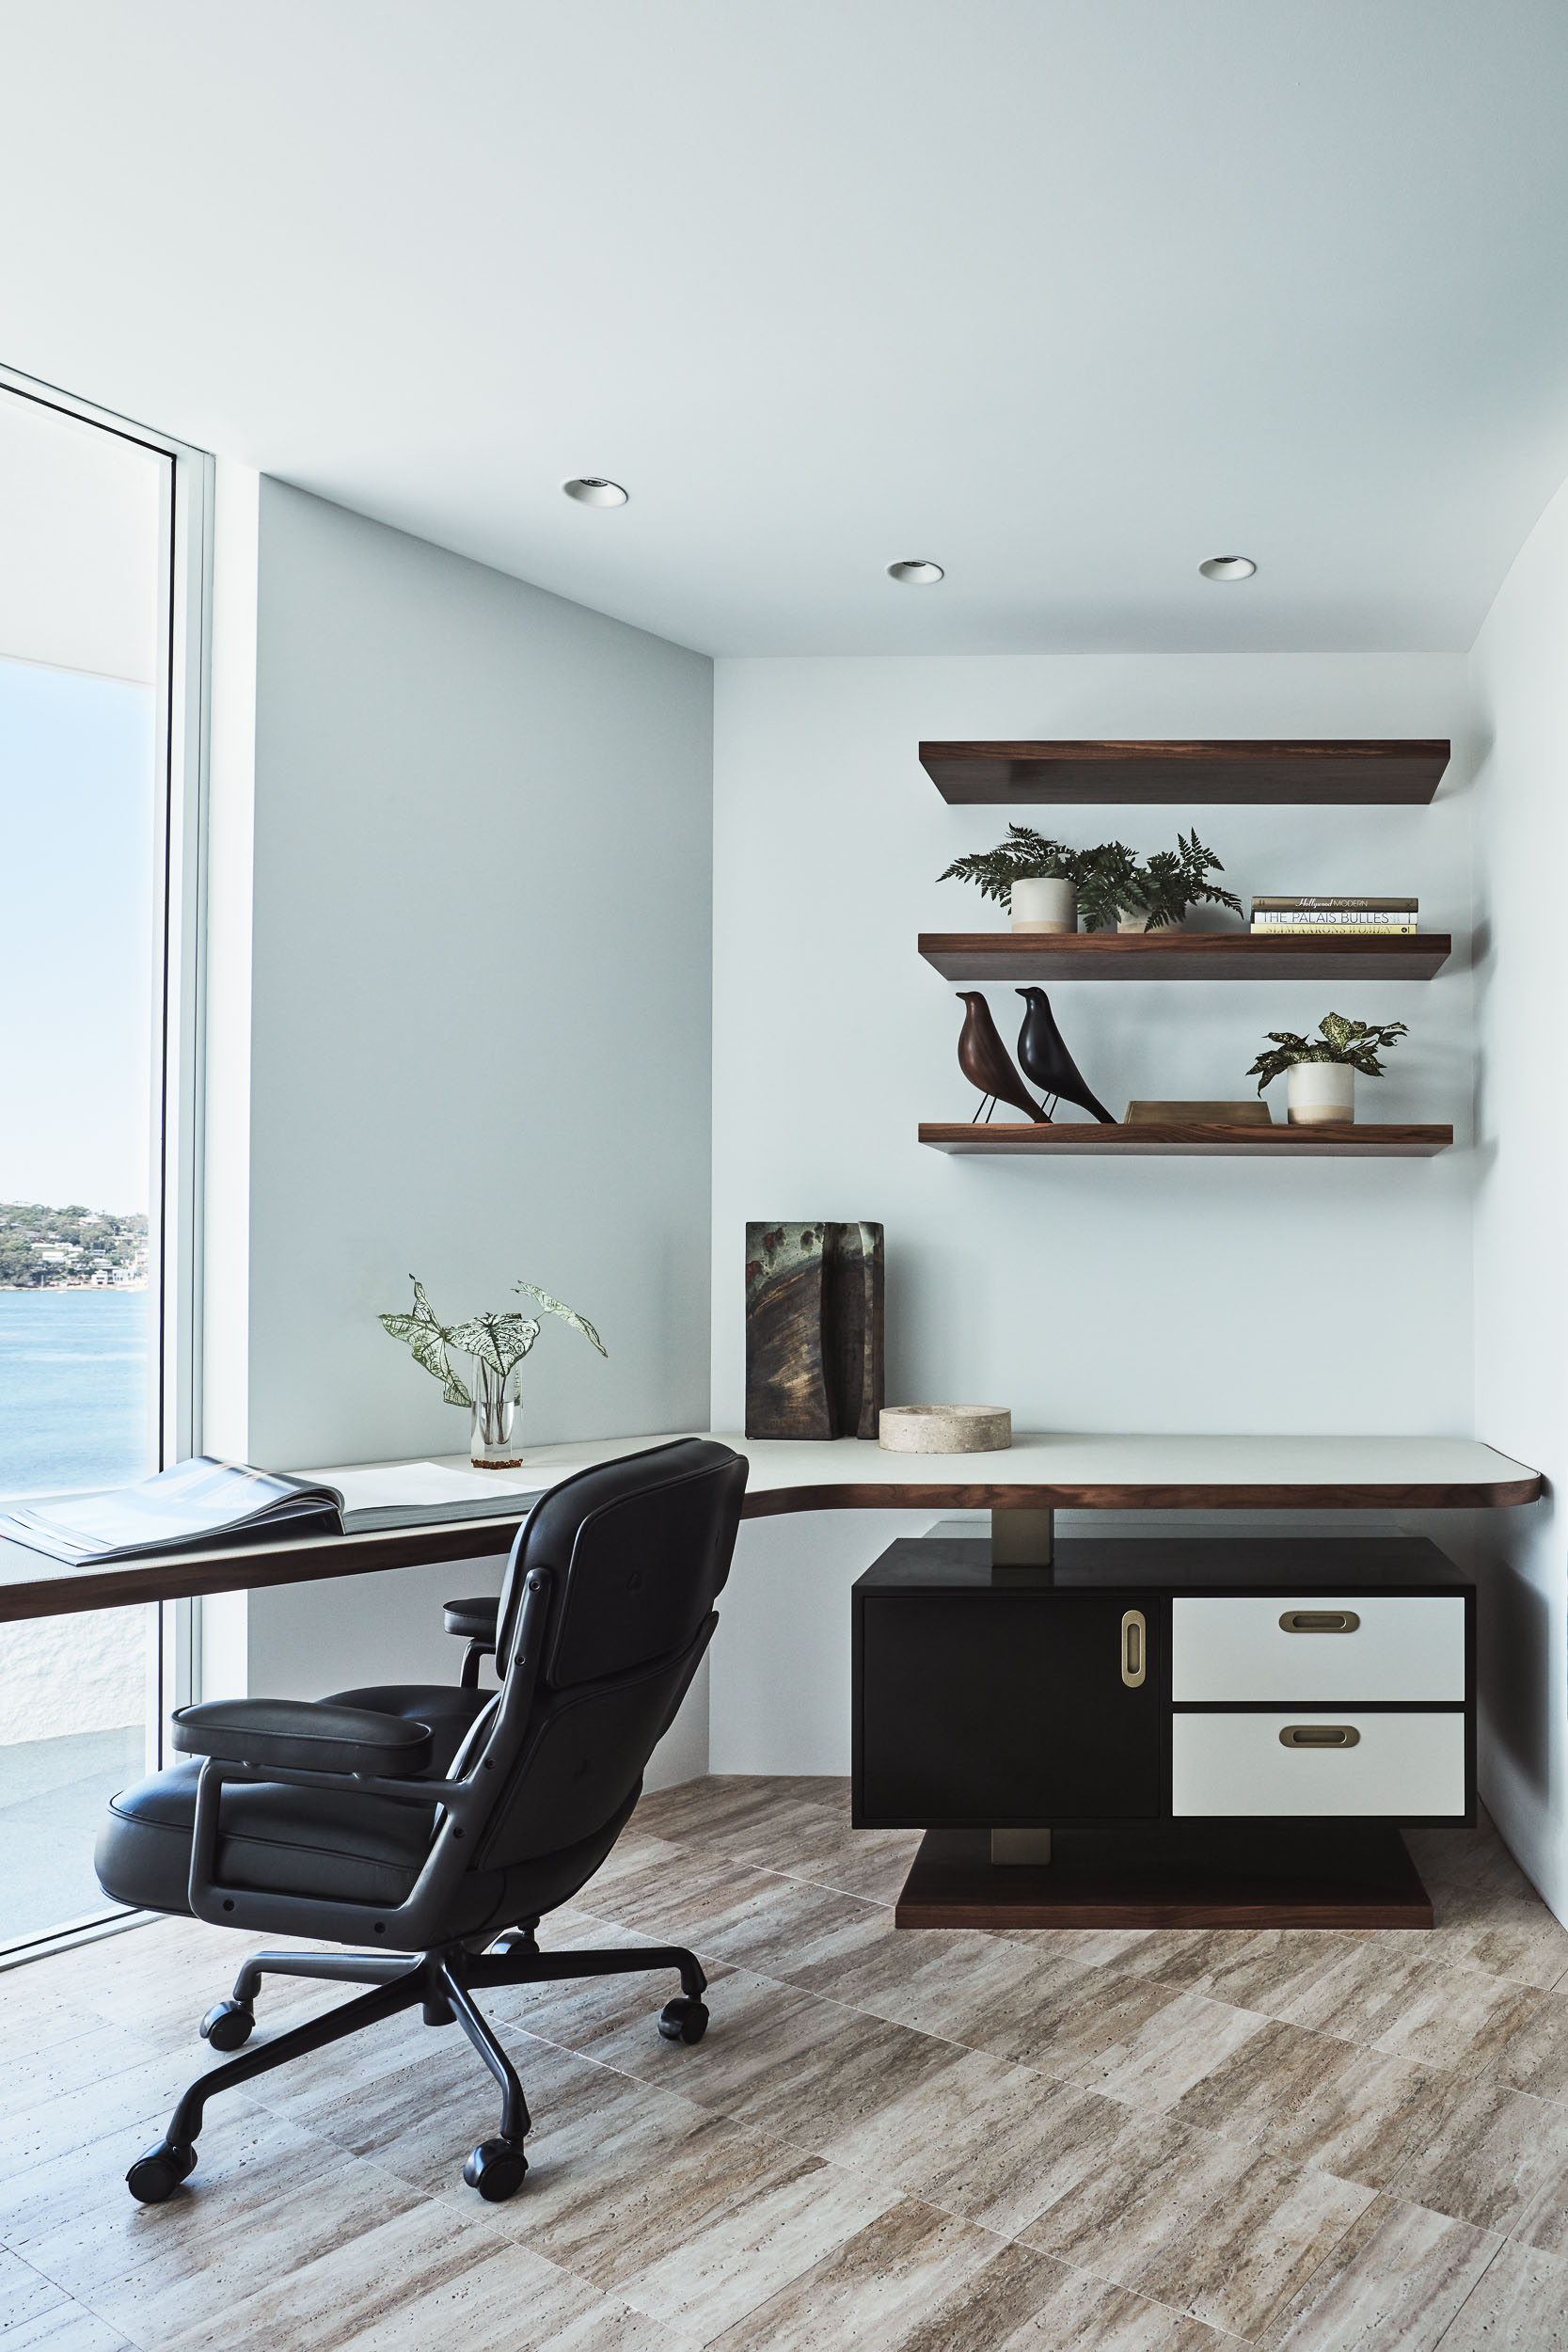 Home office study room with Eames chair and custom mid century desk by Sydney interior designers, Brendan Wong Design